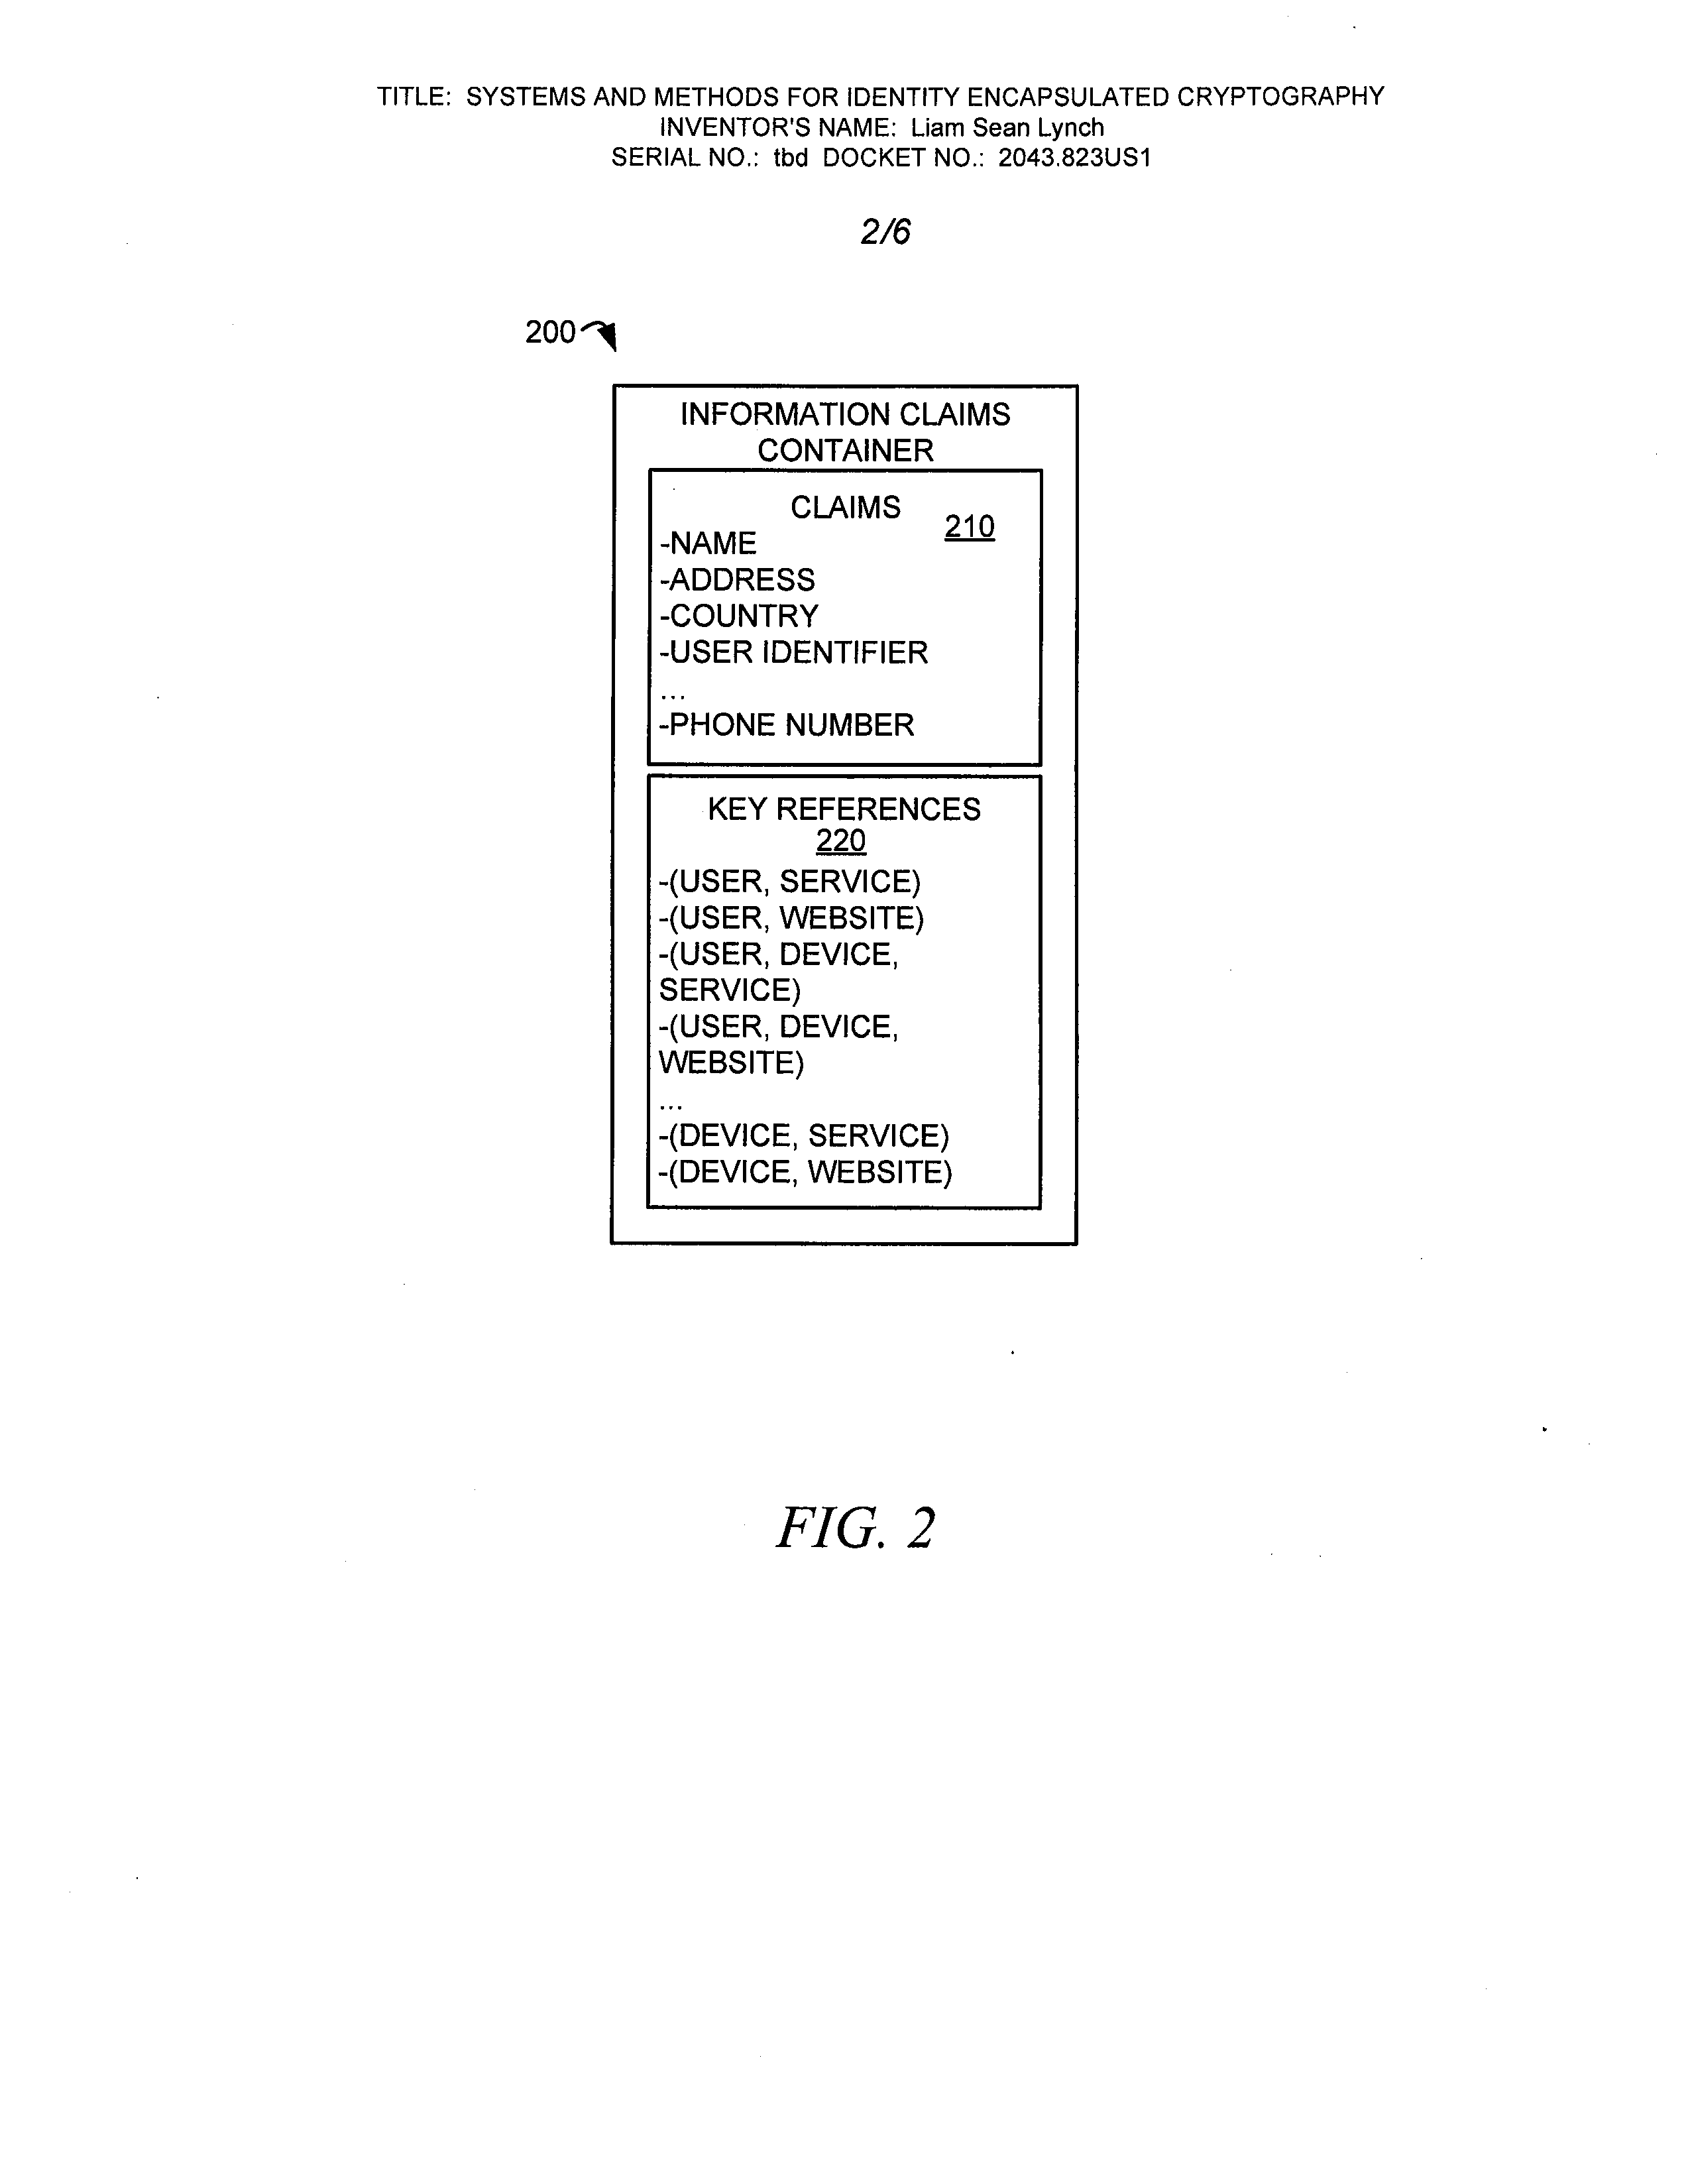 Systems and methods for identity encapsulated cryptograhy